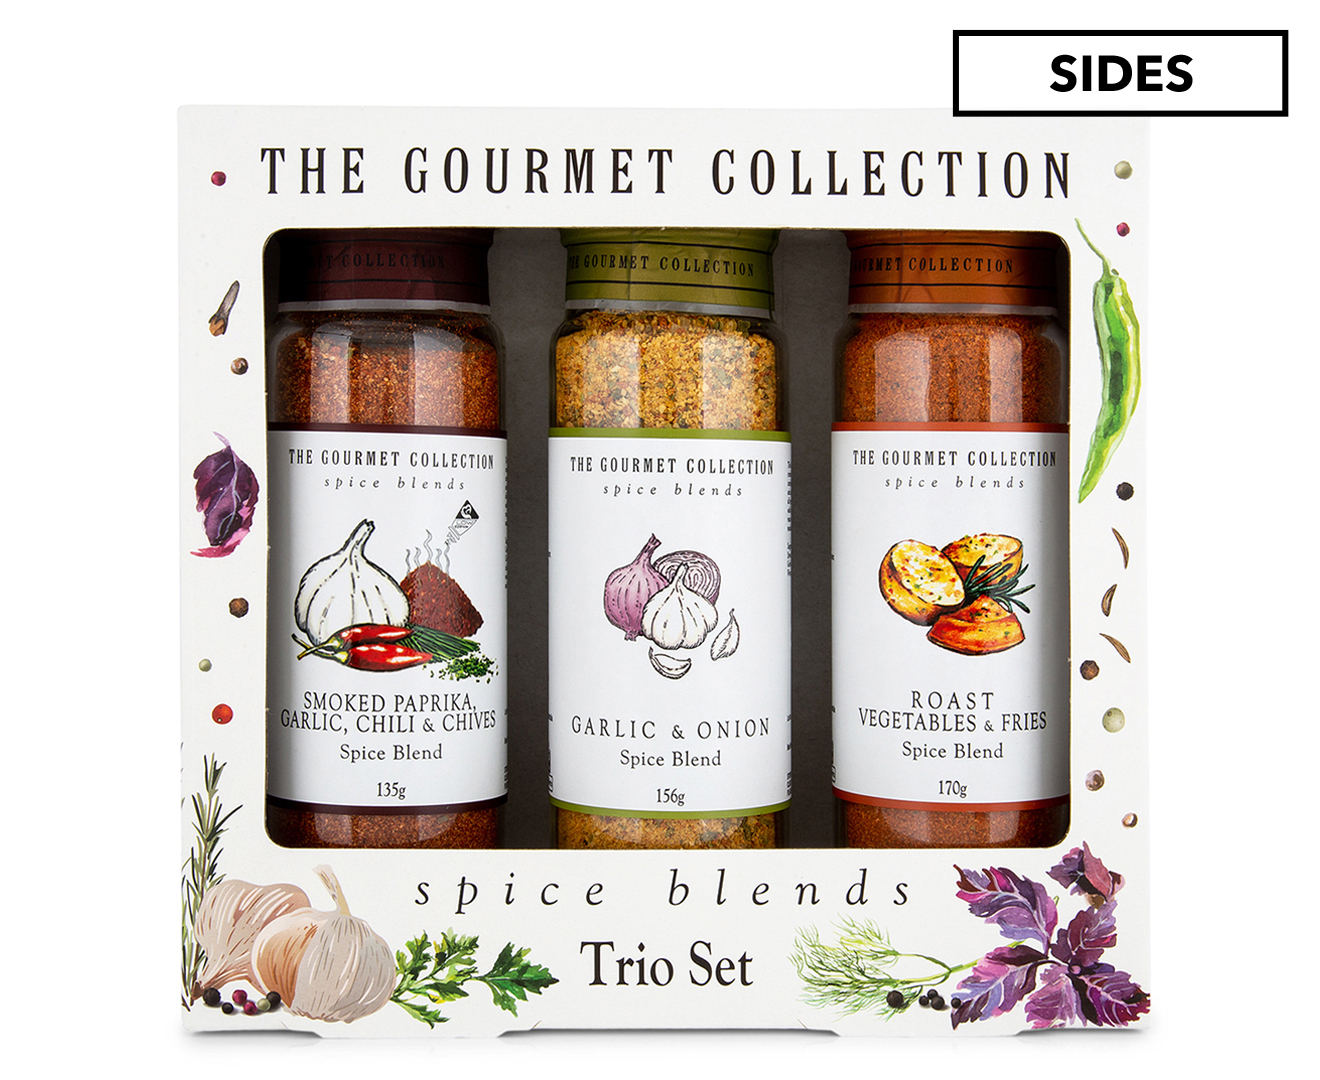 The Gourmet Collection Sides Spice Blends 3-Pack | Catch.com.au